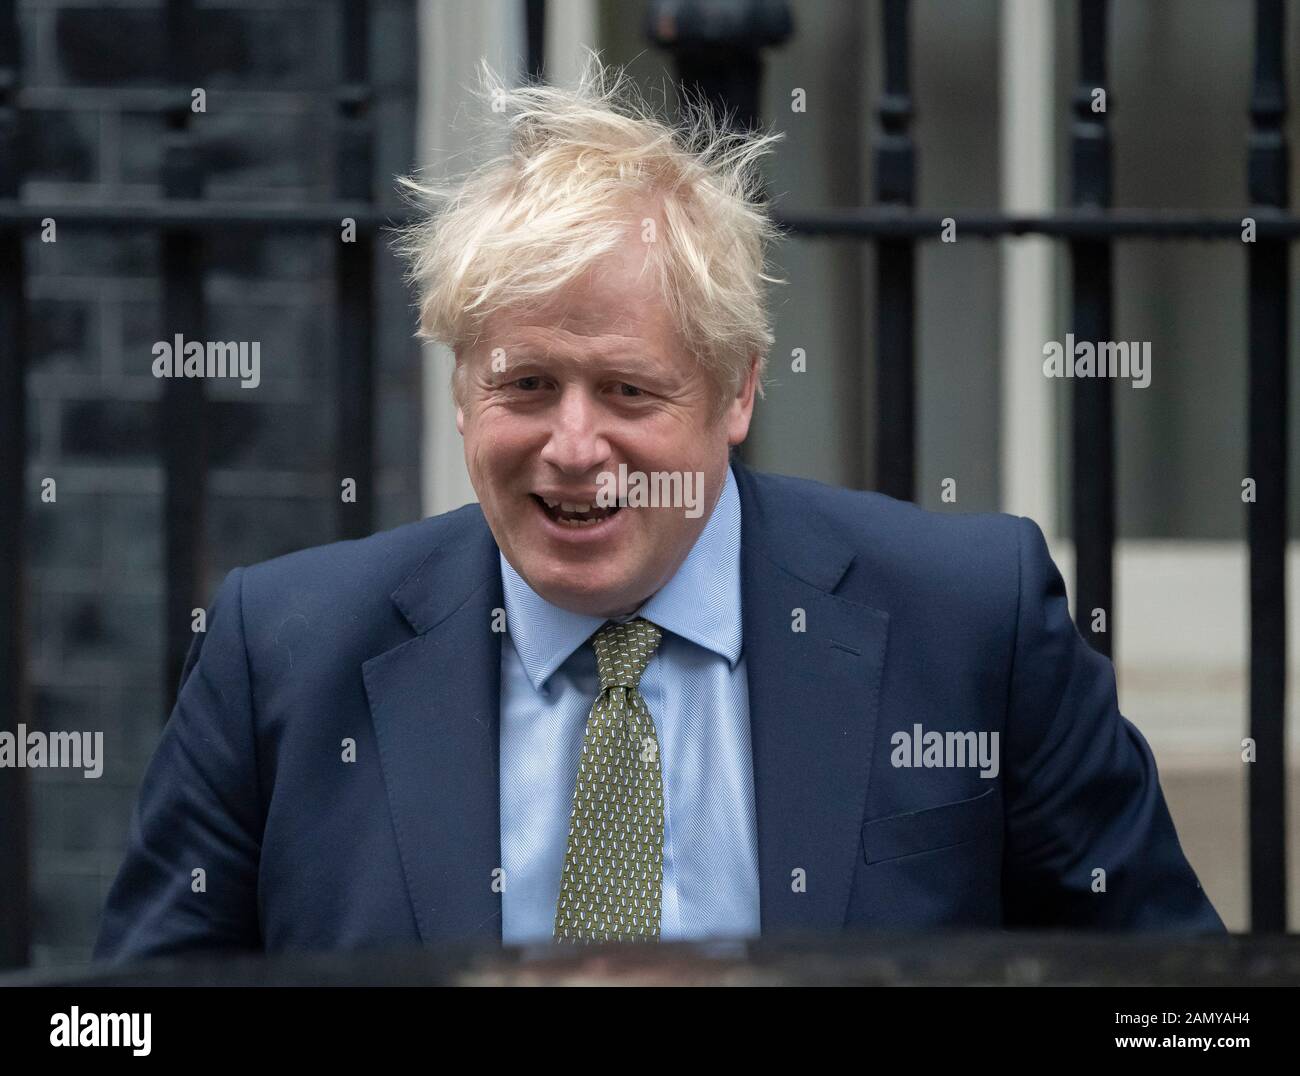 10 Downing Street, London, UK. 15th January 2020. Prime Minister Boris Johnson leaves Downing Street to attend weekly Prime Ministers Questions in Parlament. Credit: Malcolm Park/Alamy. Stock Photo